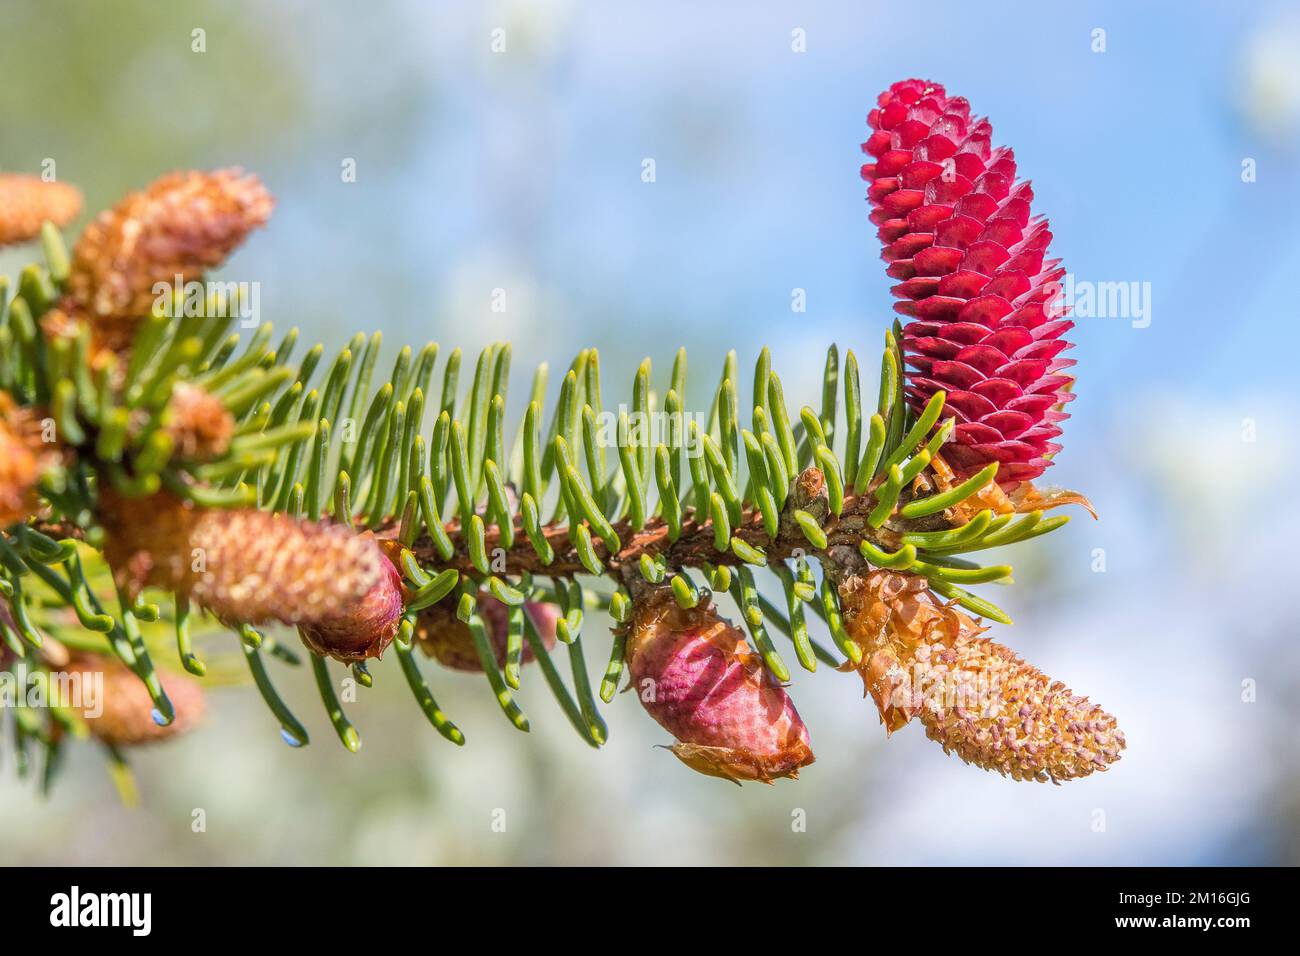 Abies alba, the European silver fir or silver fir, is a fir native to the mountains of Europe, female and male flowers. Stock Photo